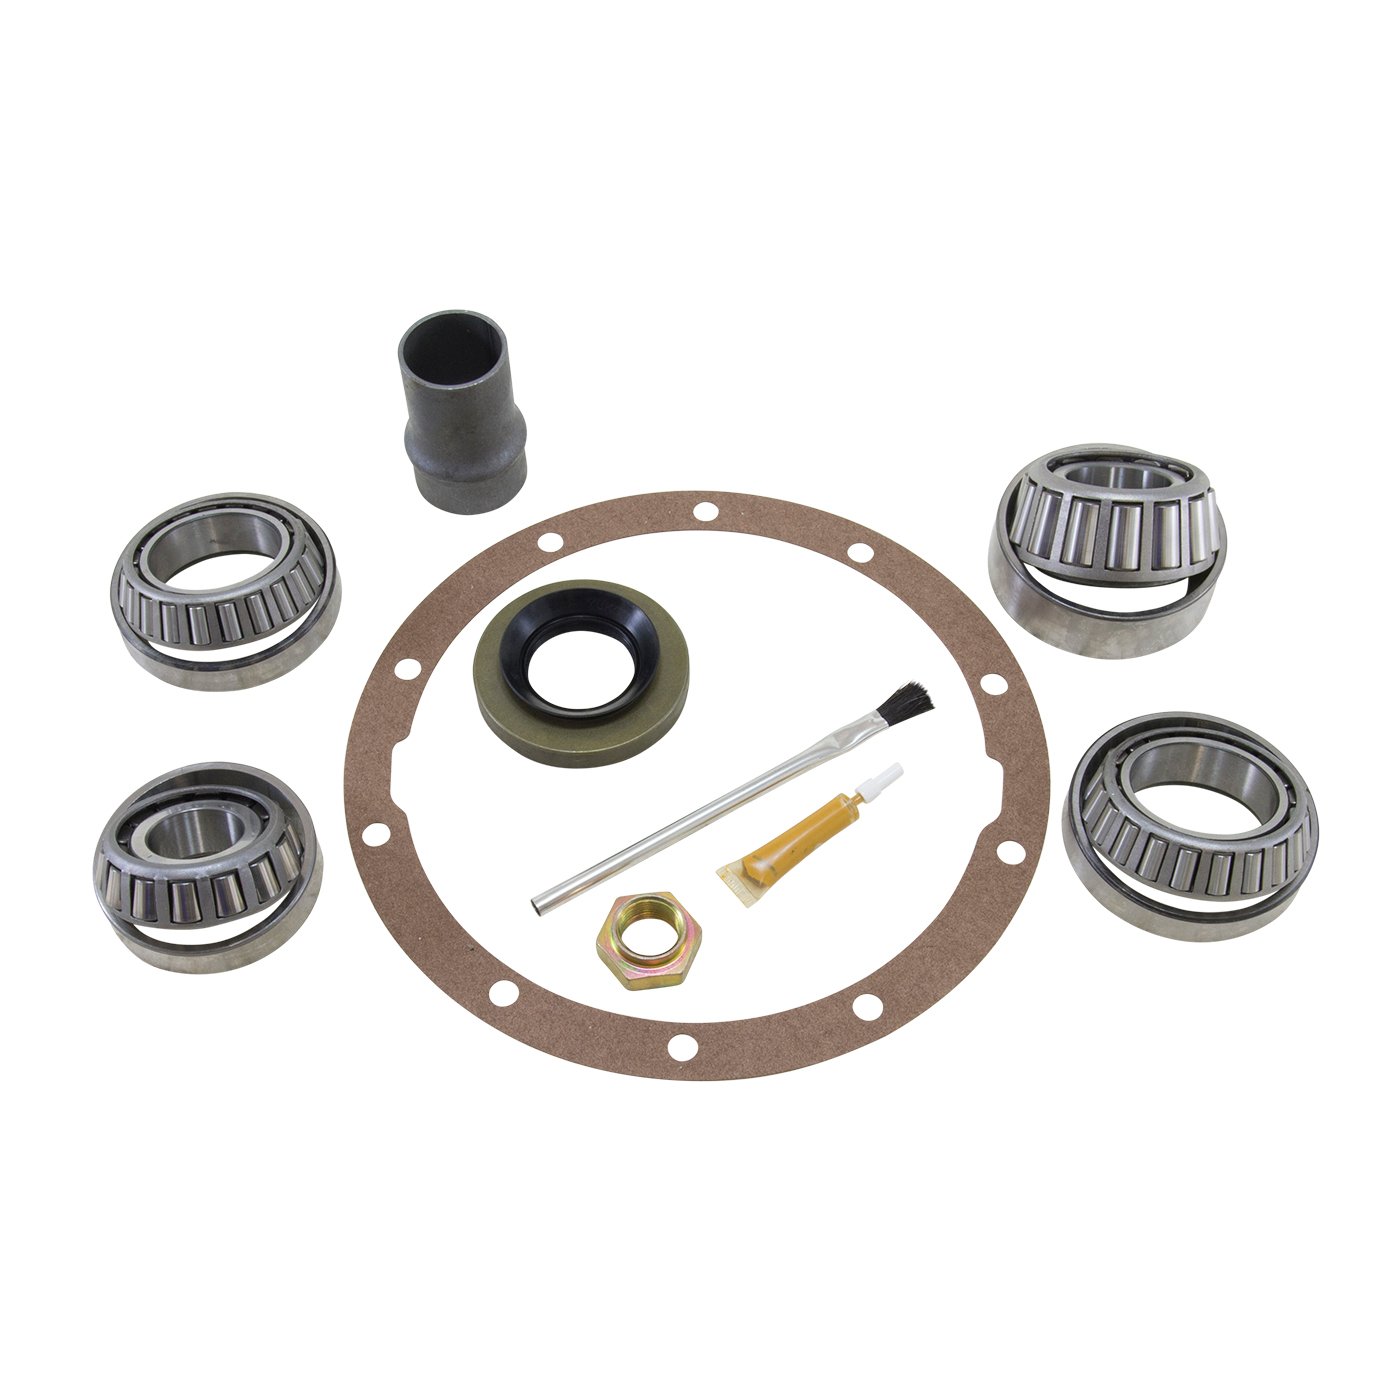 Bearing Kit For 85 & Down Toy 8 in. And Aftrmrkt 27 Spl Rng&Pinion W/Zip Lckr